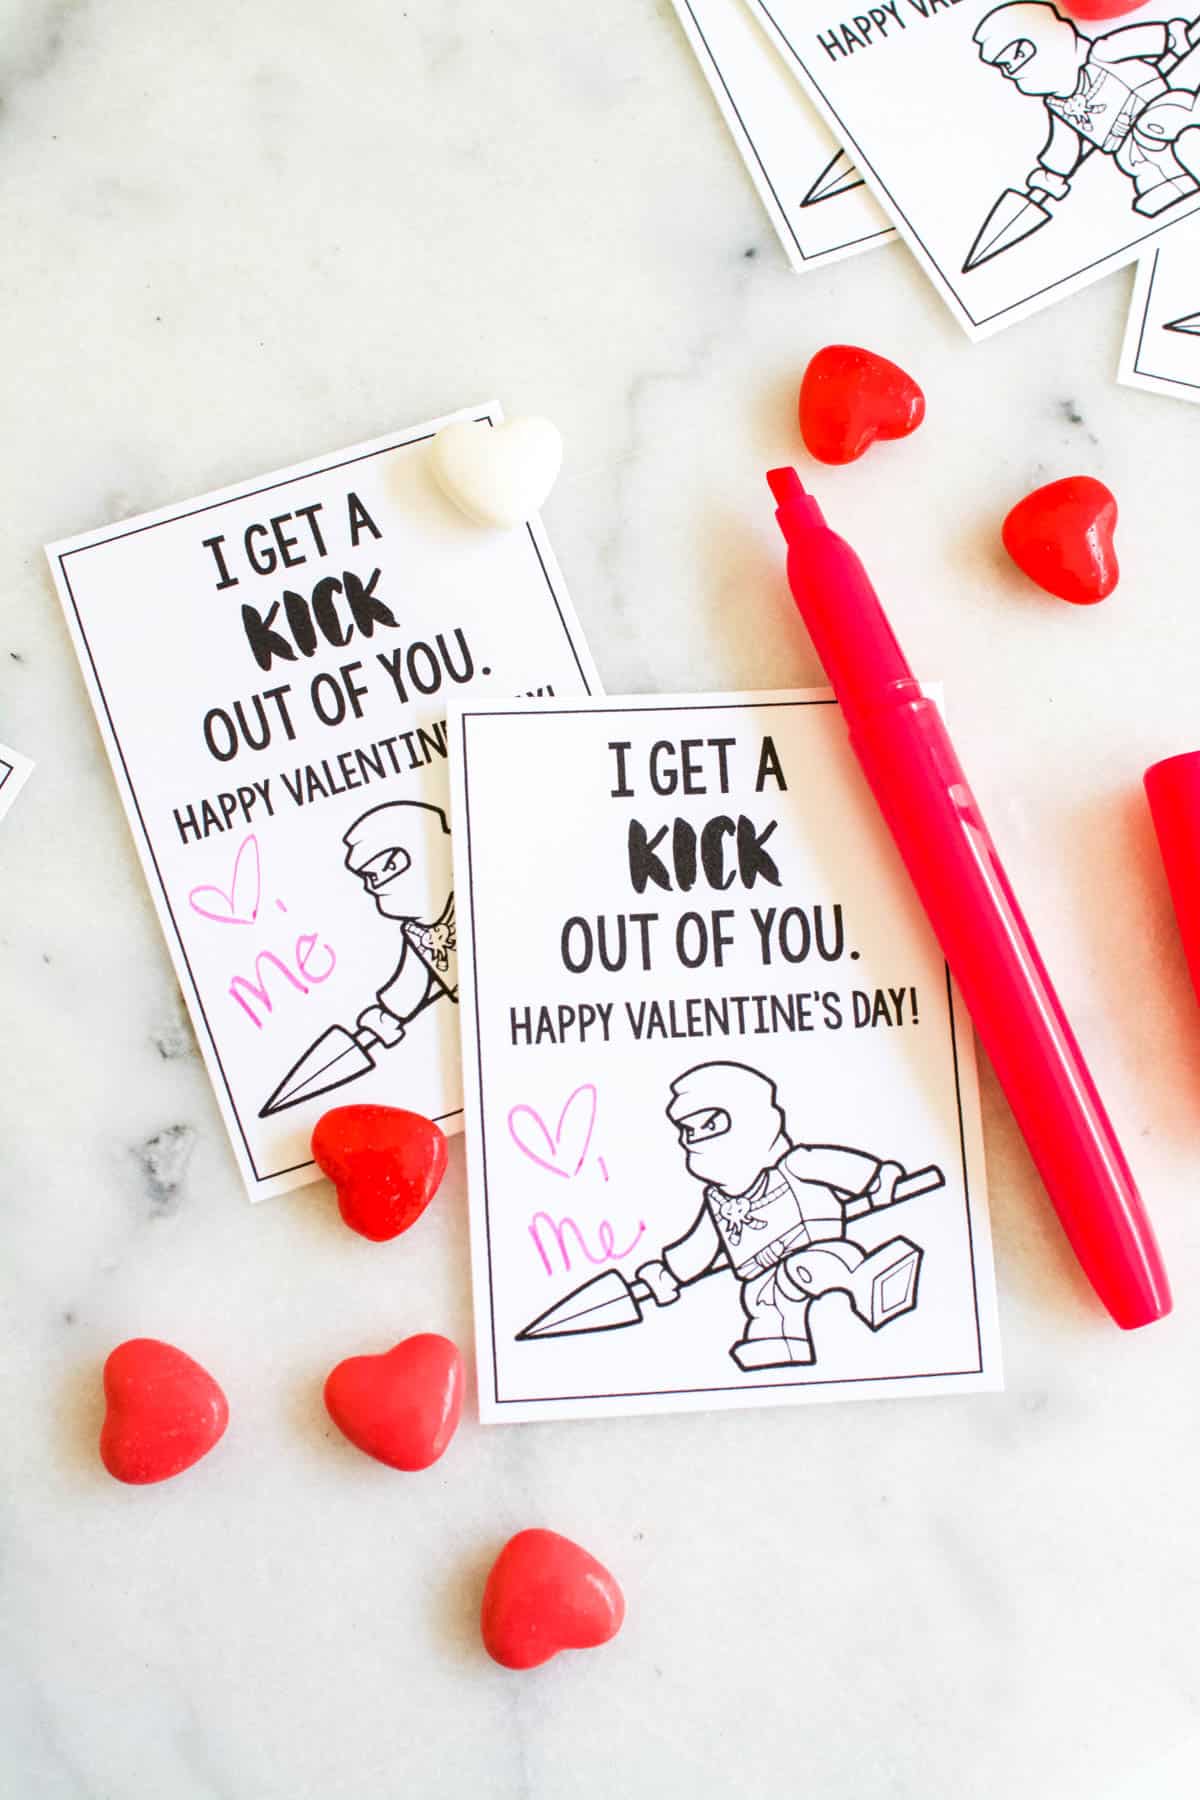 Ninjago Valentine's cards on a table next to heart shaped candies.